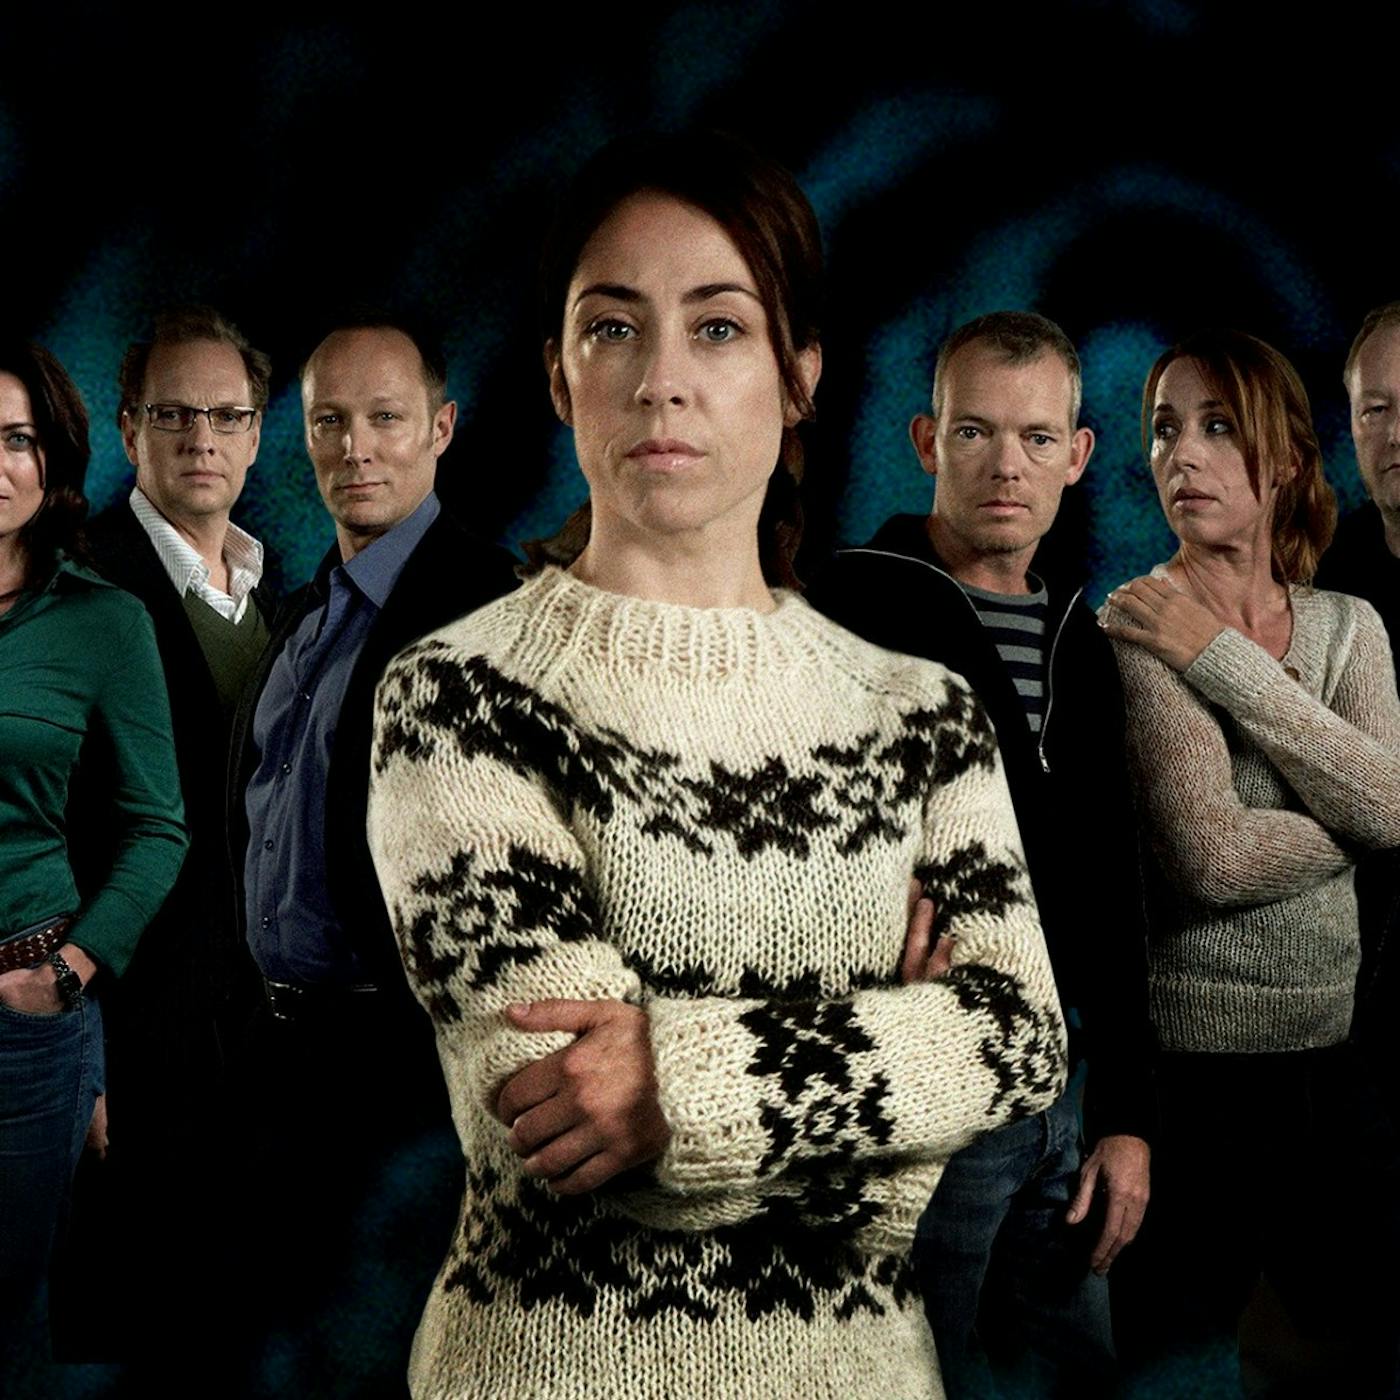 Sarah Lund Sweater From Killing (Forbrydelsen), Explained | Topic